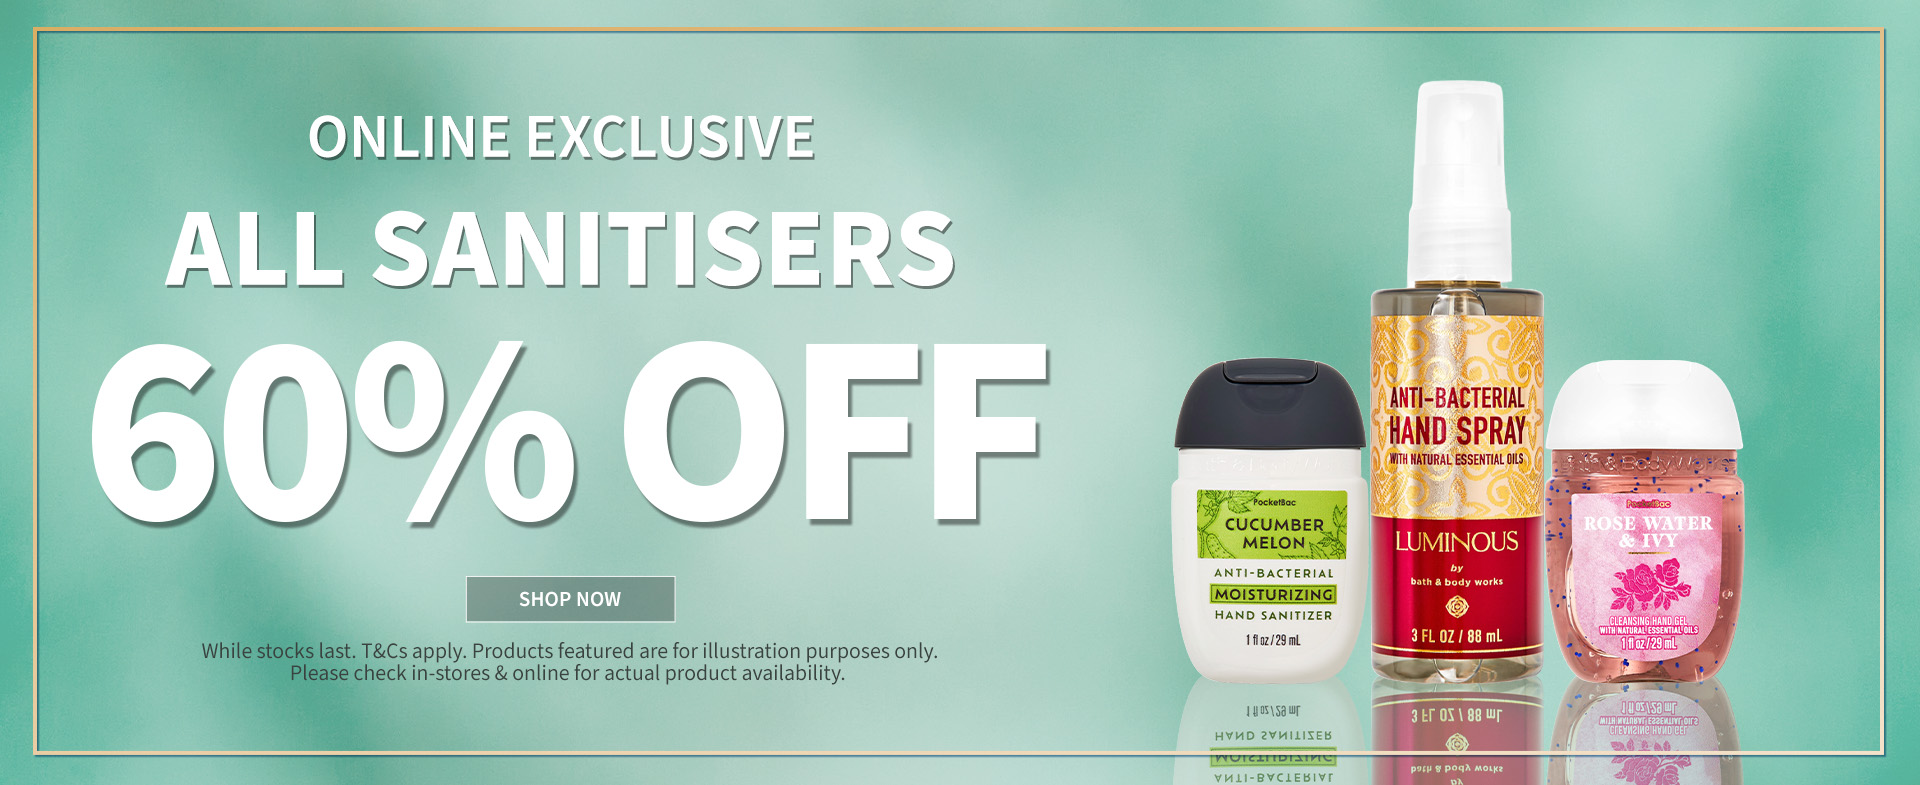 ALL SANITISERS 60% OFF